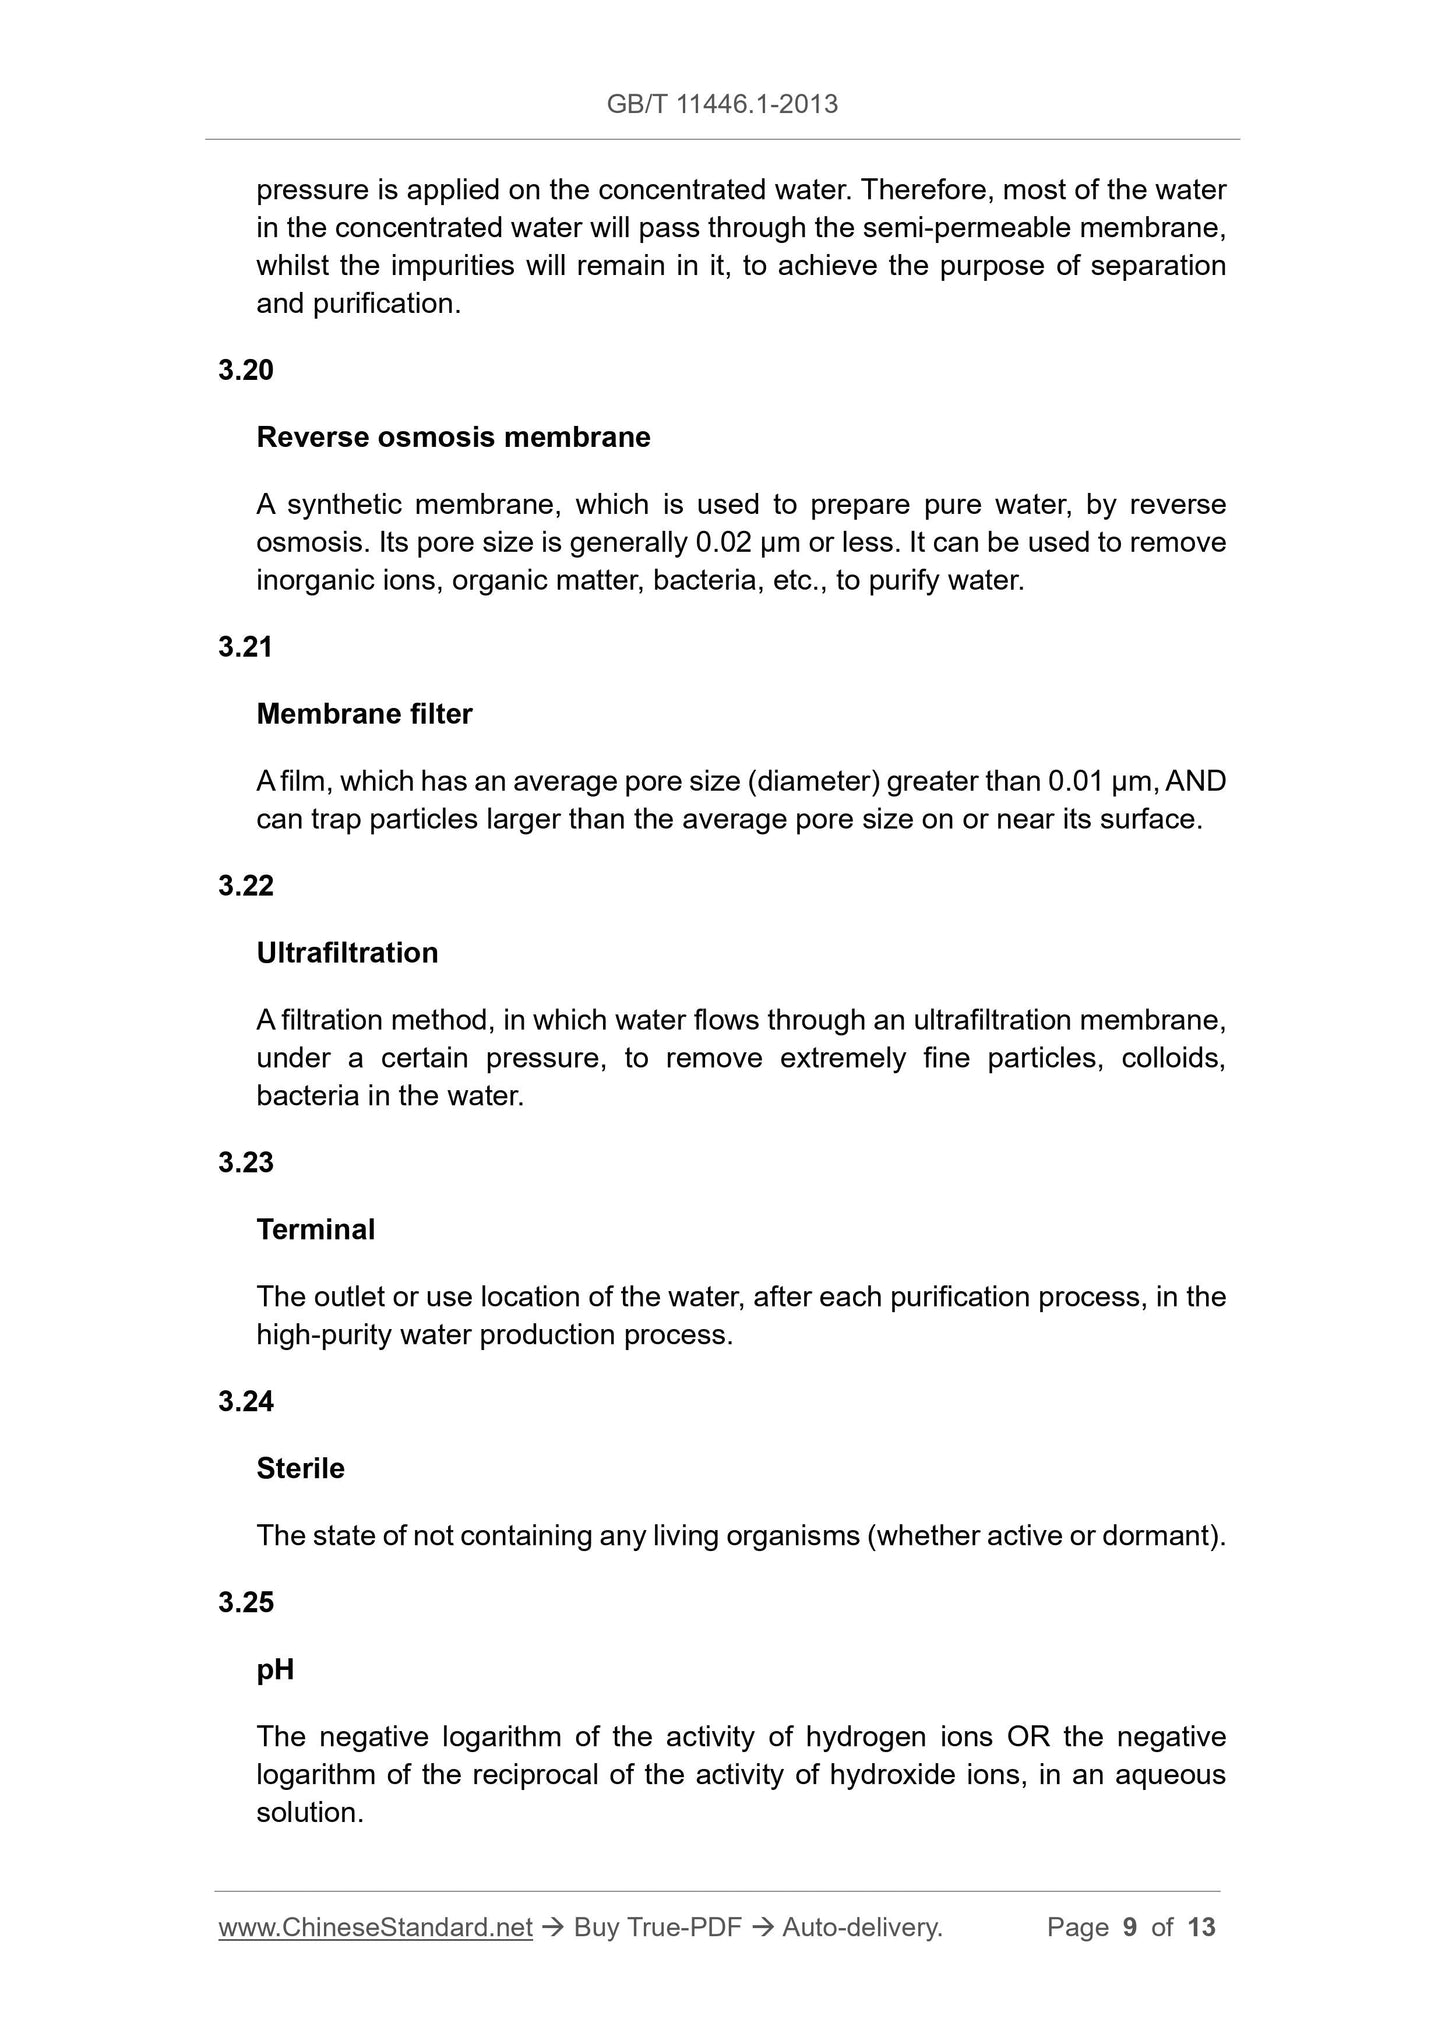 GB/T 11446.1-2013 Page 5